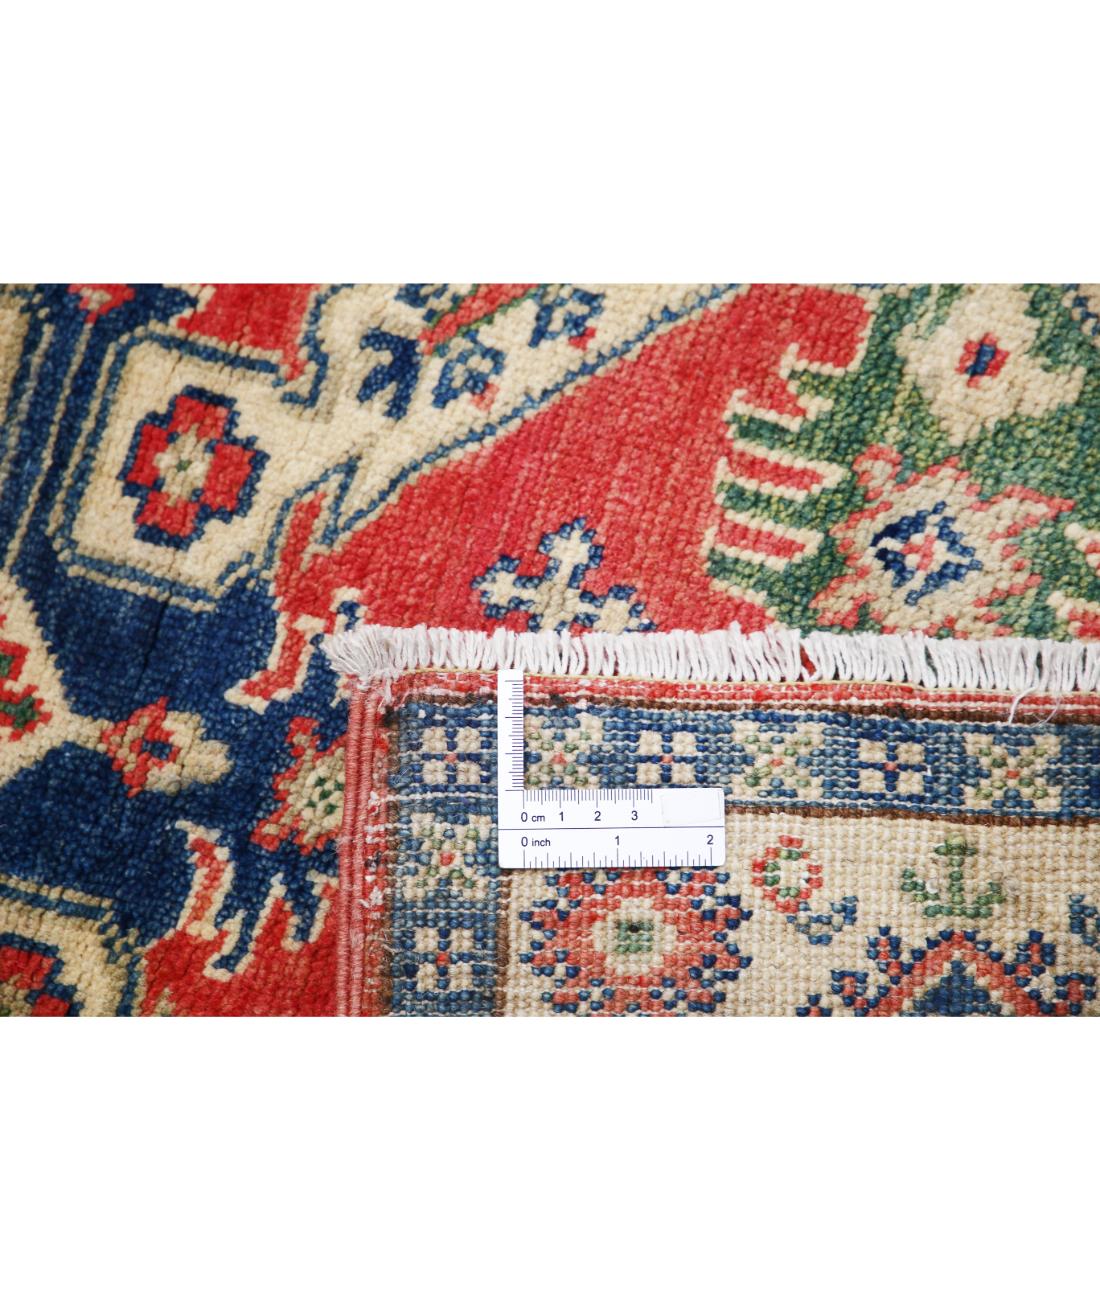 Hand Knotted Tribal Kazak Wool Rug - 2'10'' x 4'8'' 2' 10" X 4' 8" (86 X 142) / Red / Ivory